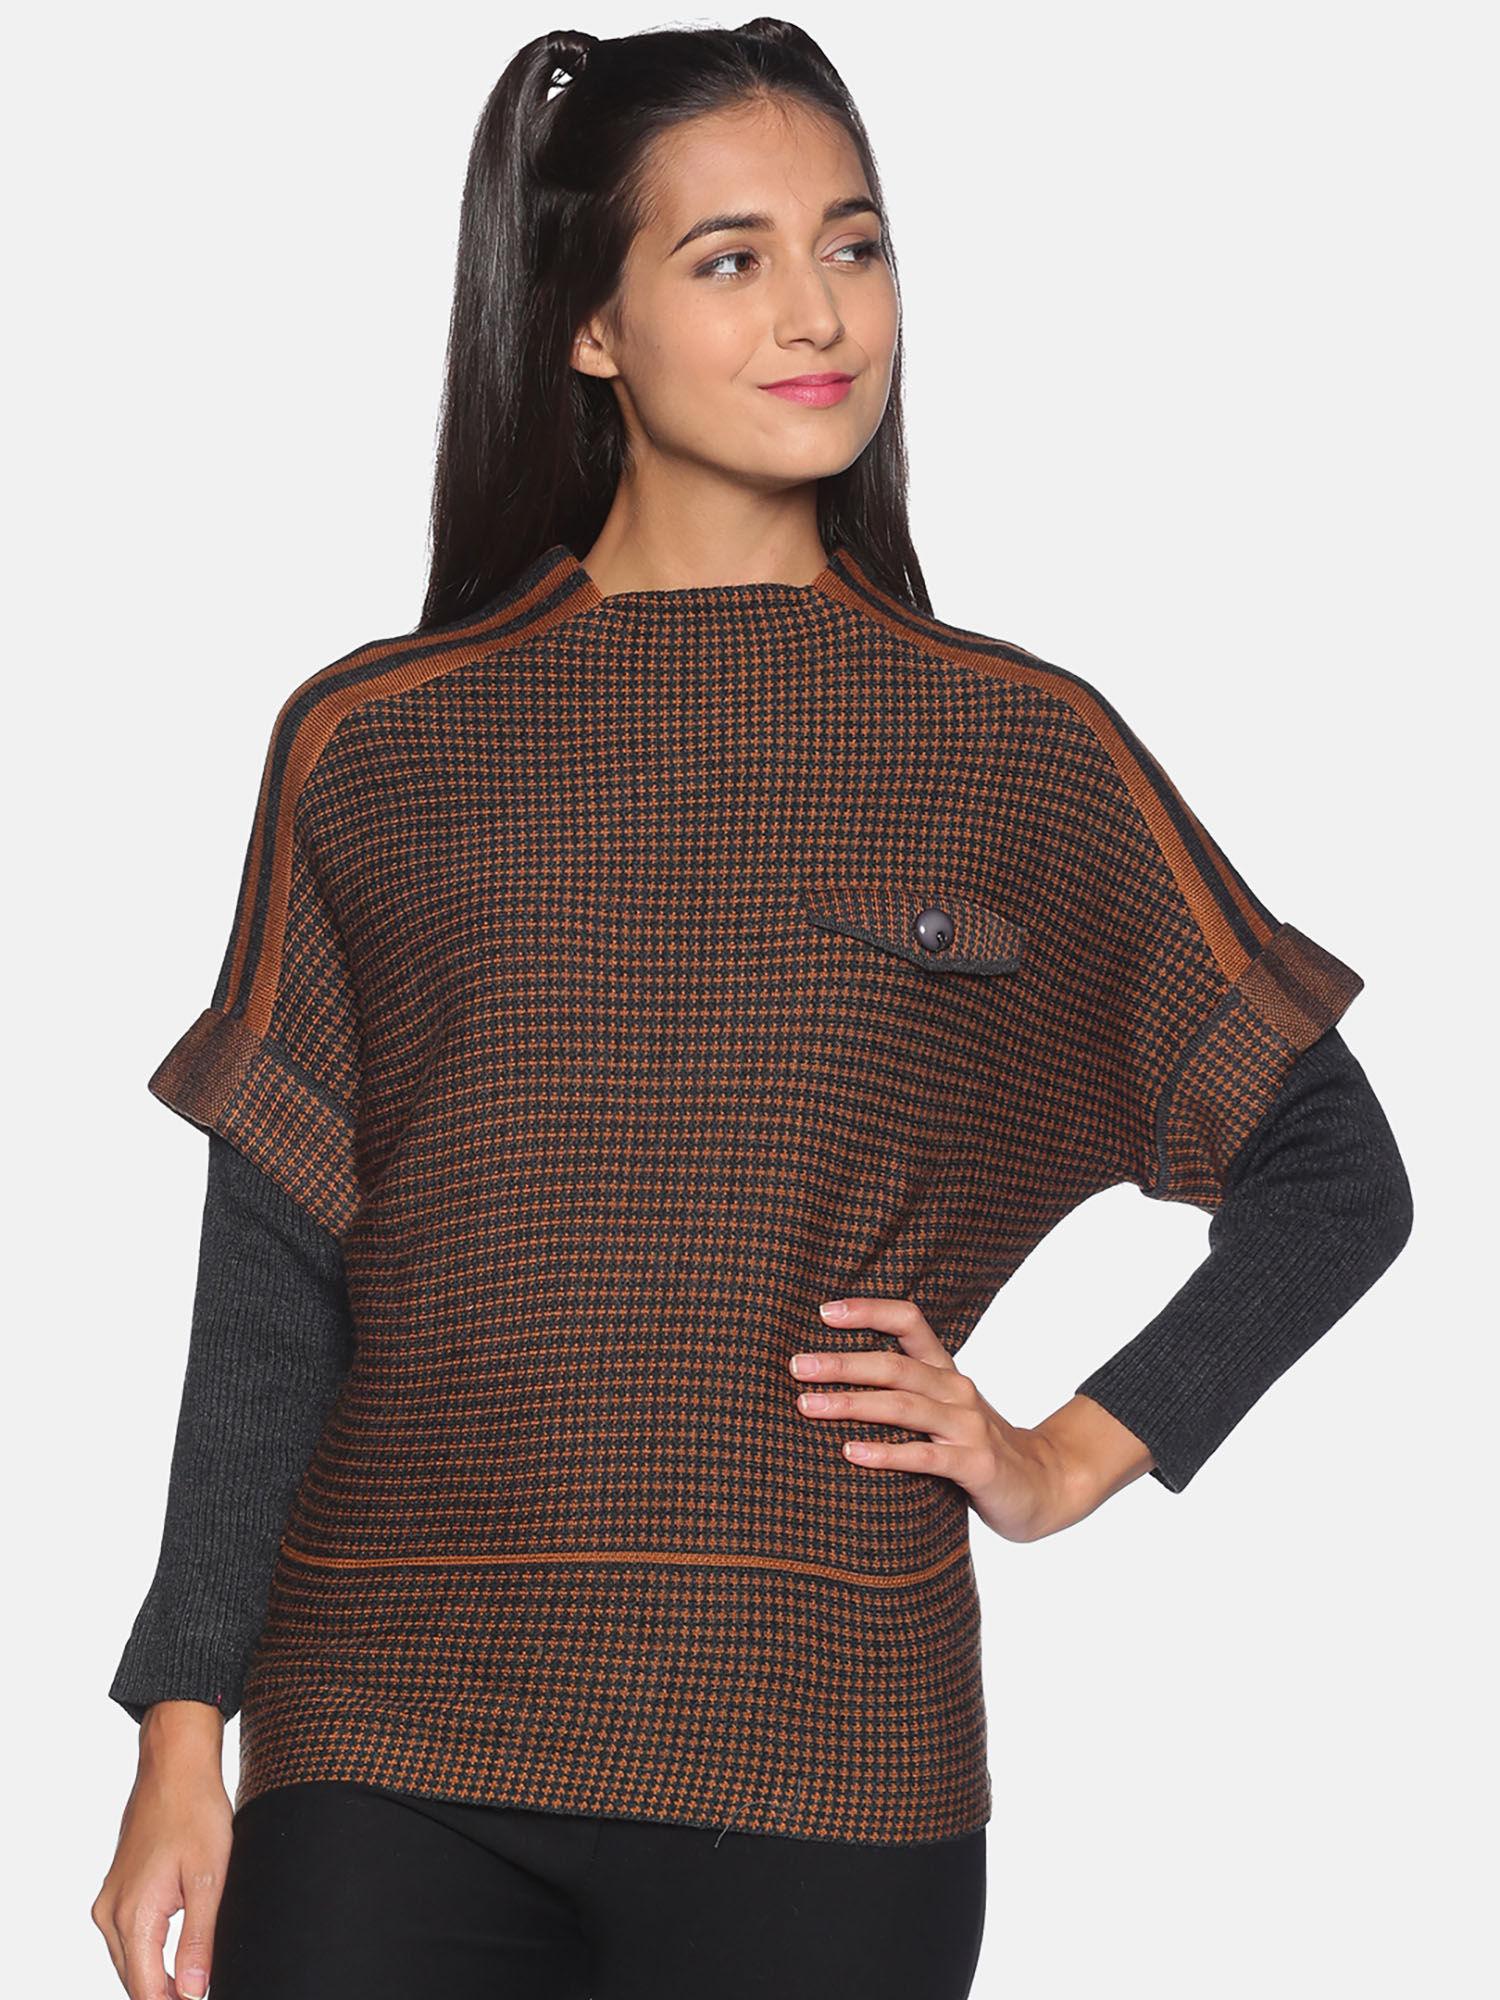 women-brown-color-sweater